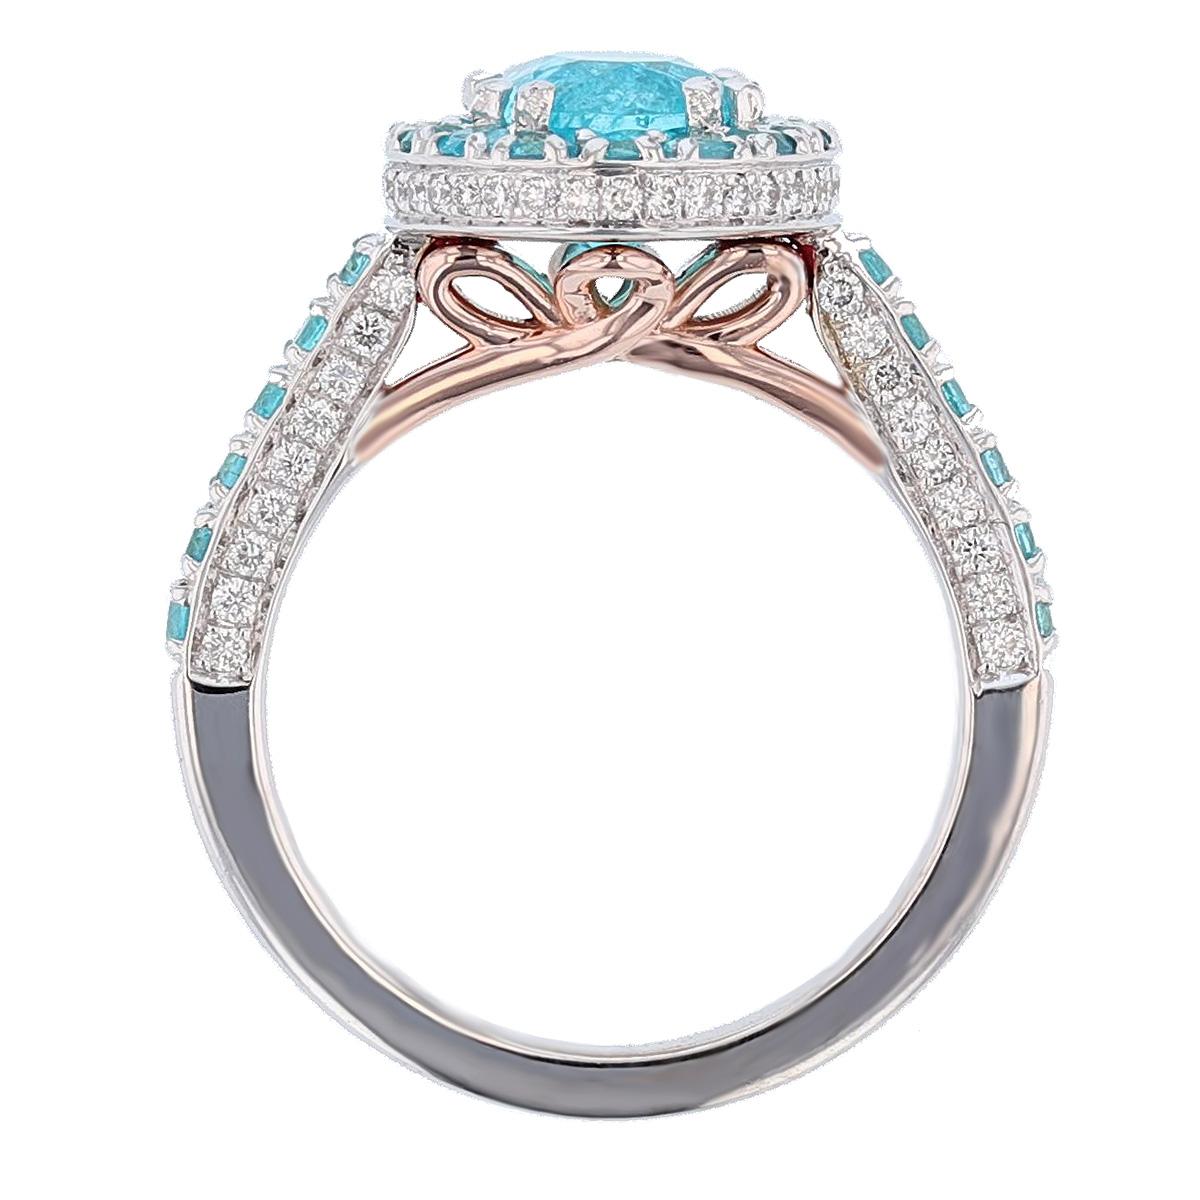 This ring is designed by Nazarelle and made in 14k white and rose gold. For the center stone it features one oval Paraiba Tourmaline from Brazil, GIA certified (GIA: 2151487144 ) weighing 1.89ct, prong set. The mounting features 28 prong set round